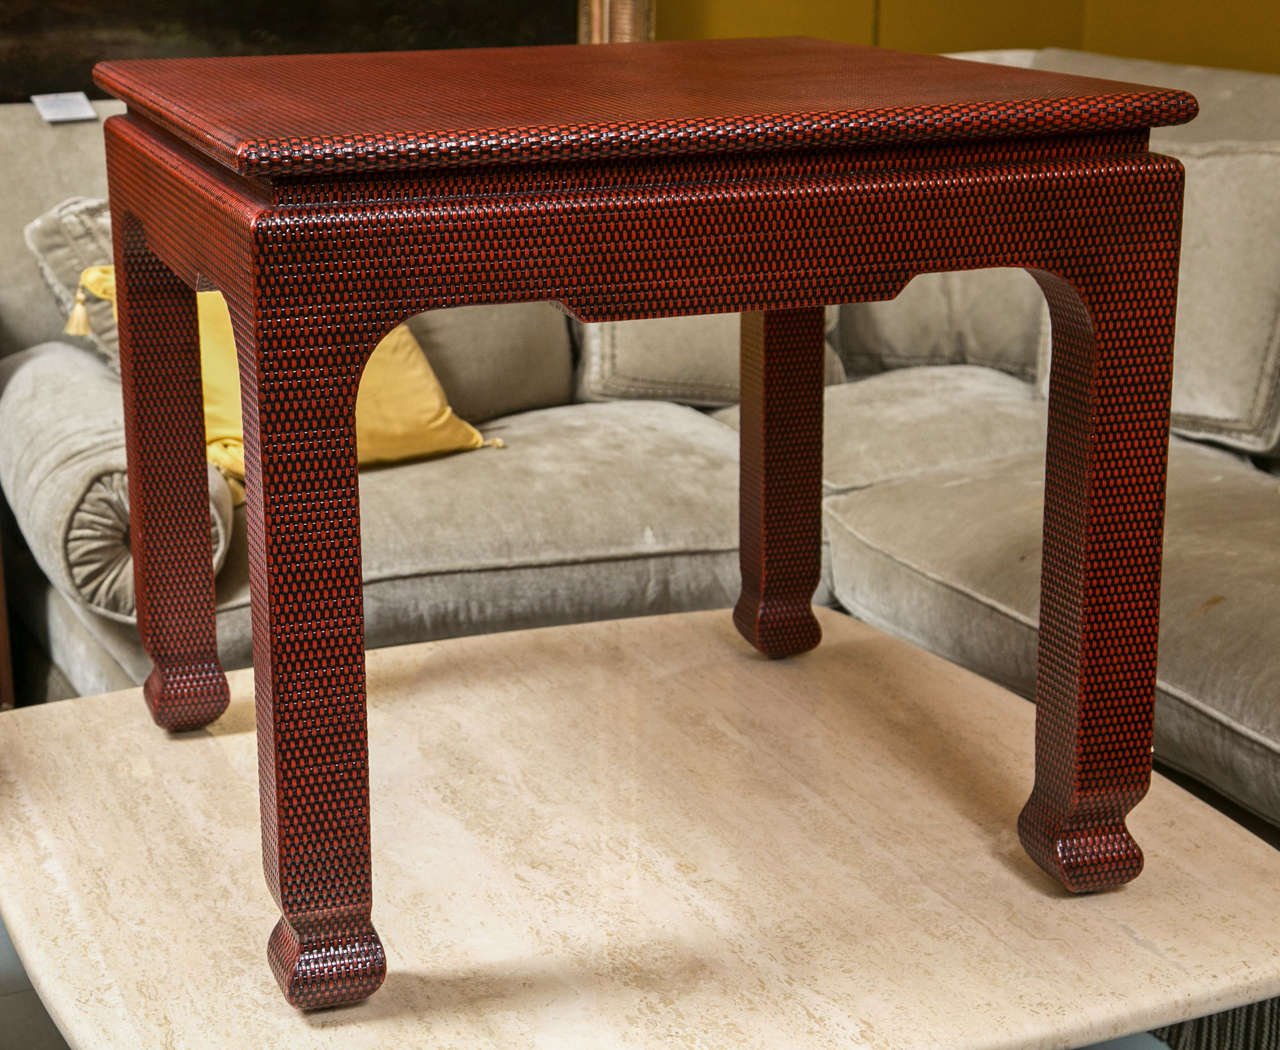 Harrison Van Horn east/west collection ren lacquered rattan games table. Los Angeles California. This table can easily be used as an eating table or end table.